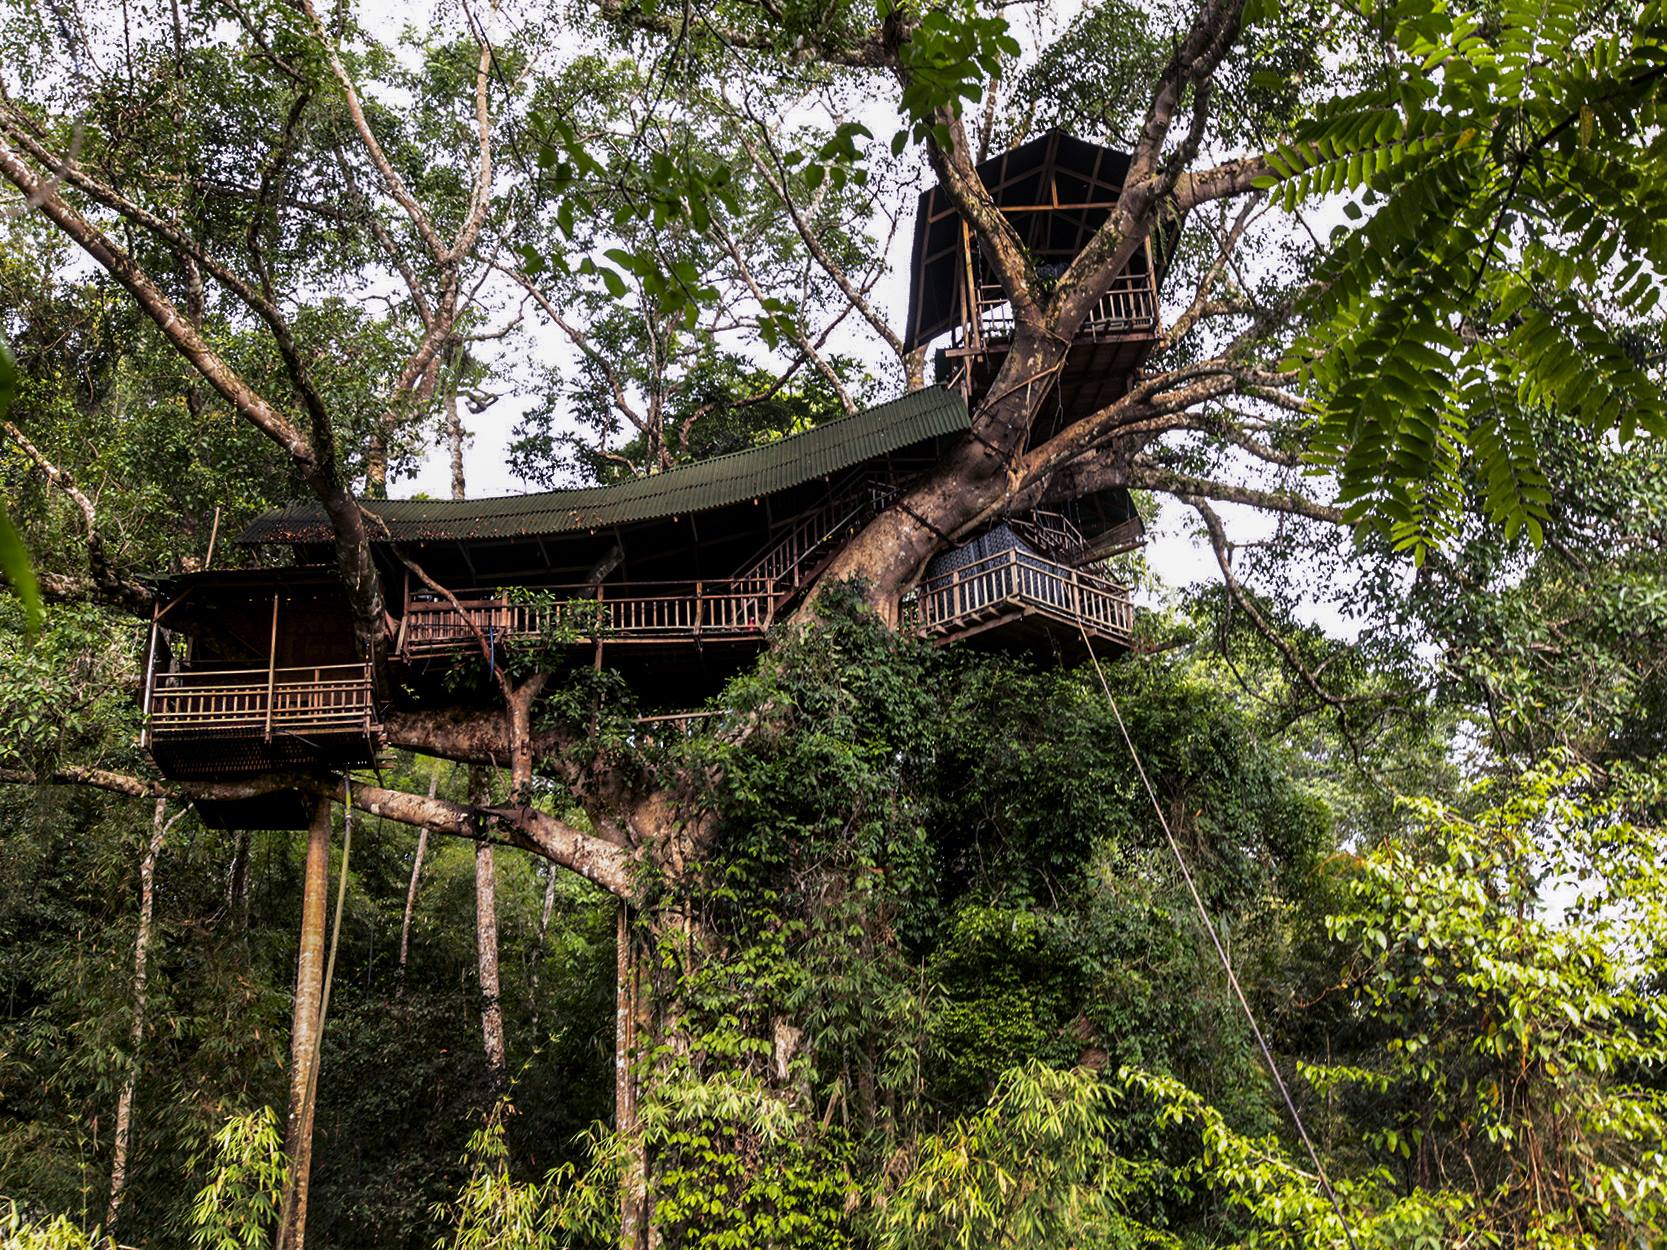 The Gibbon Experience treehouses